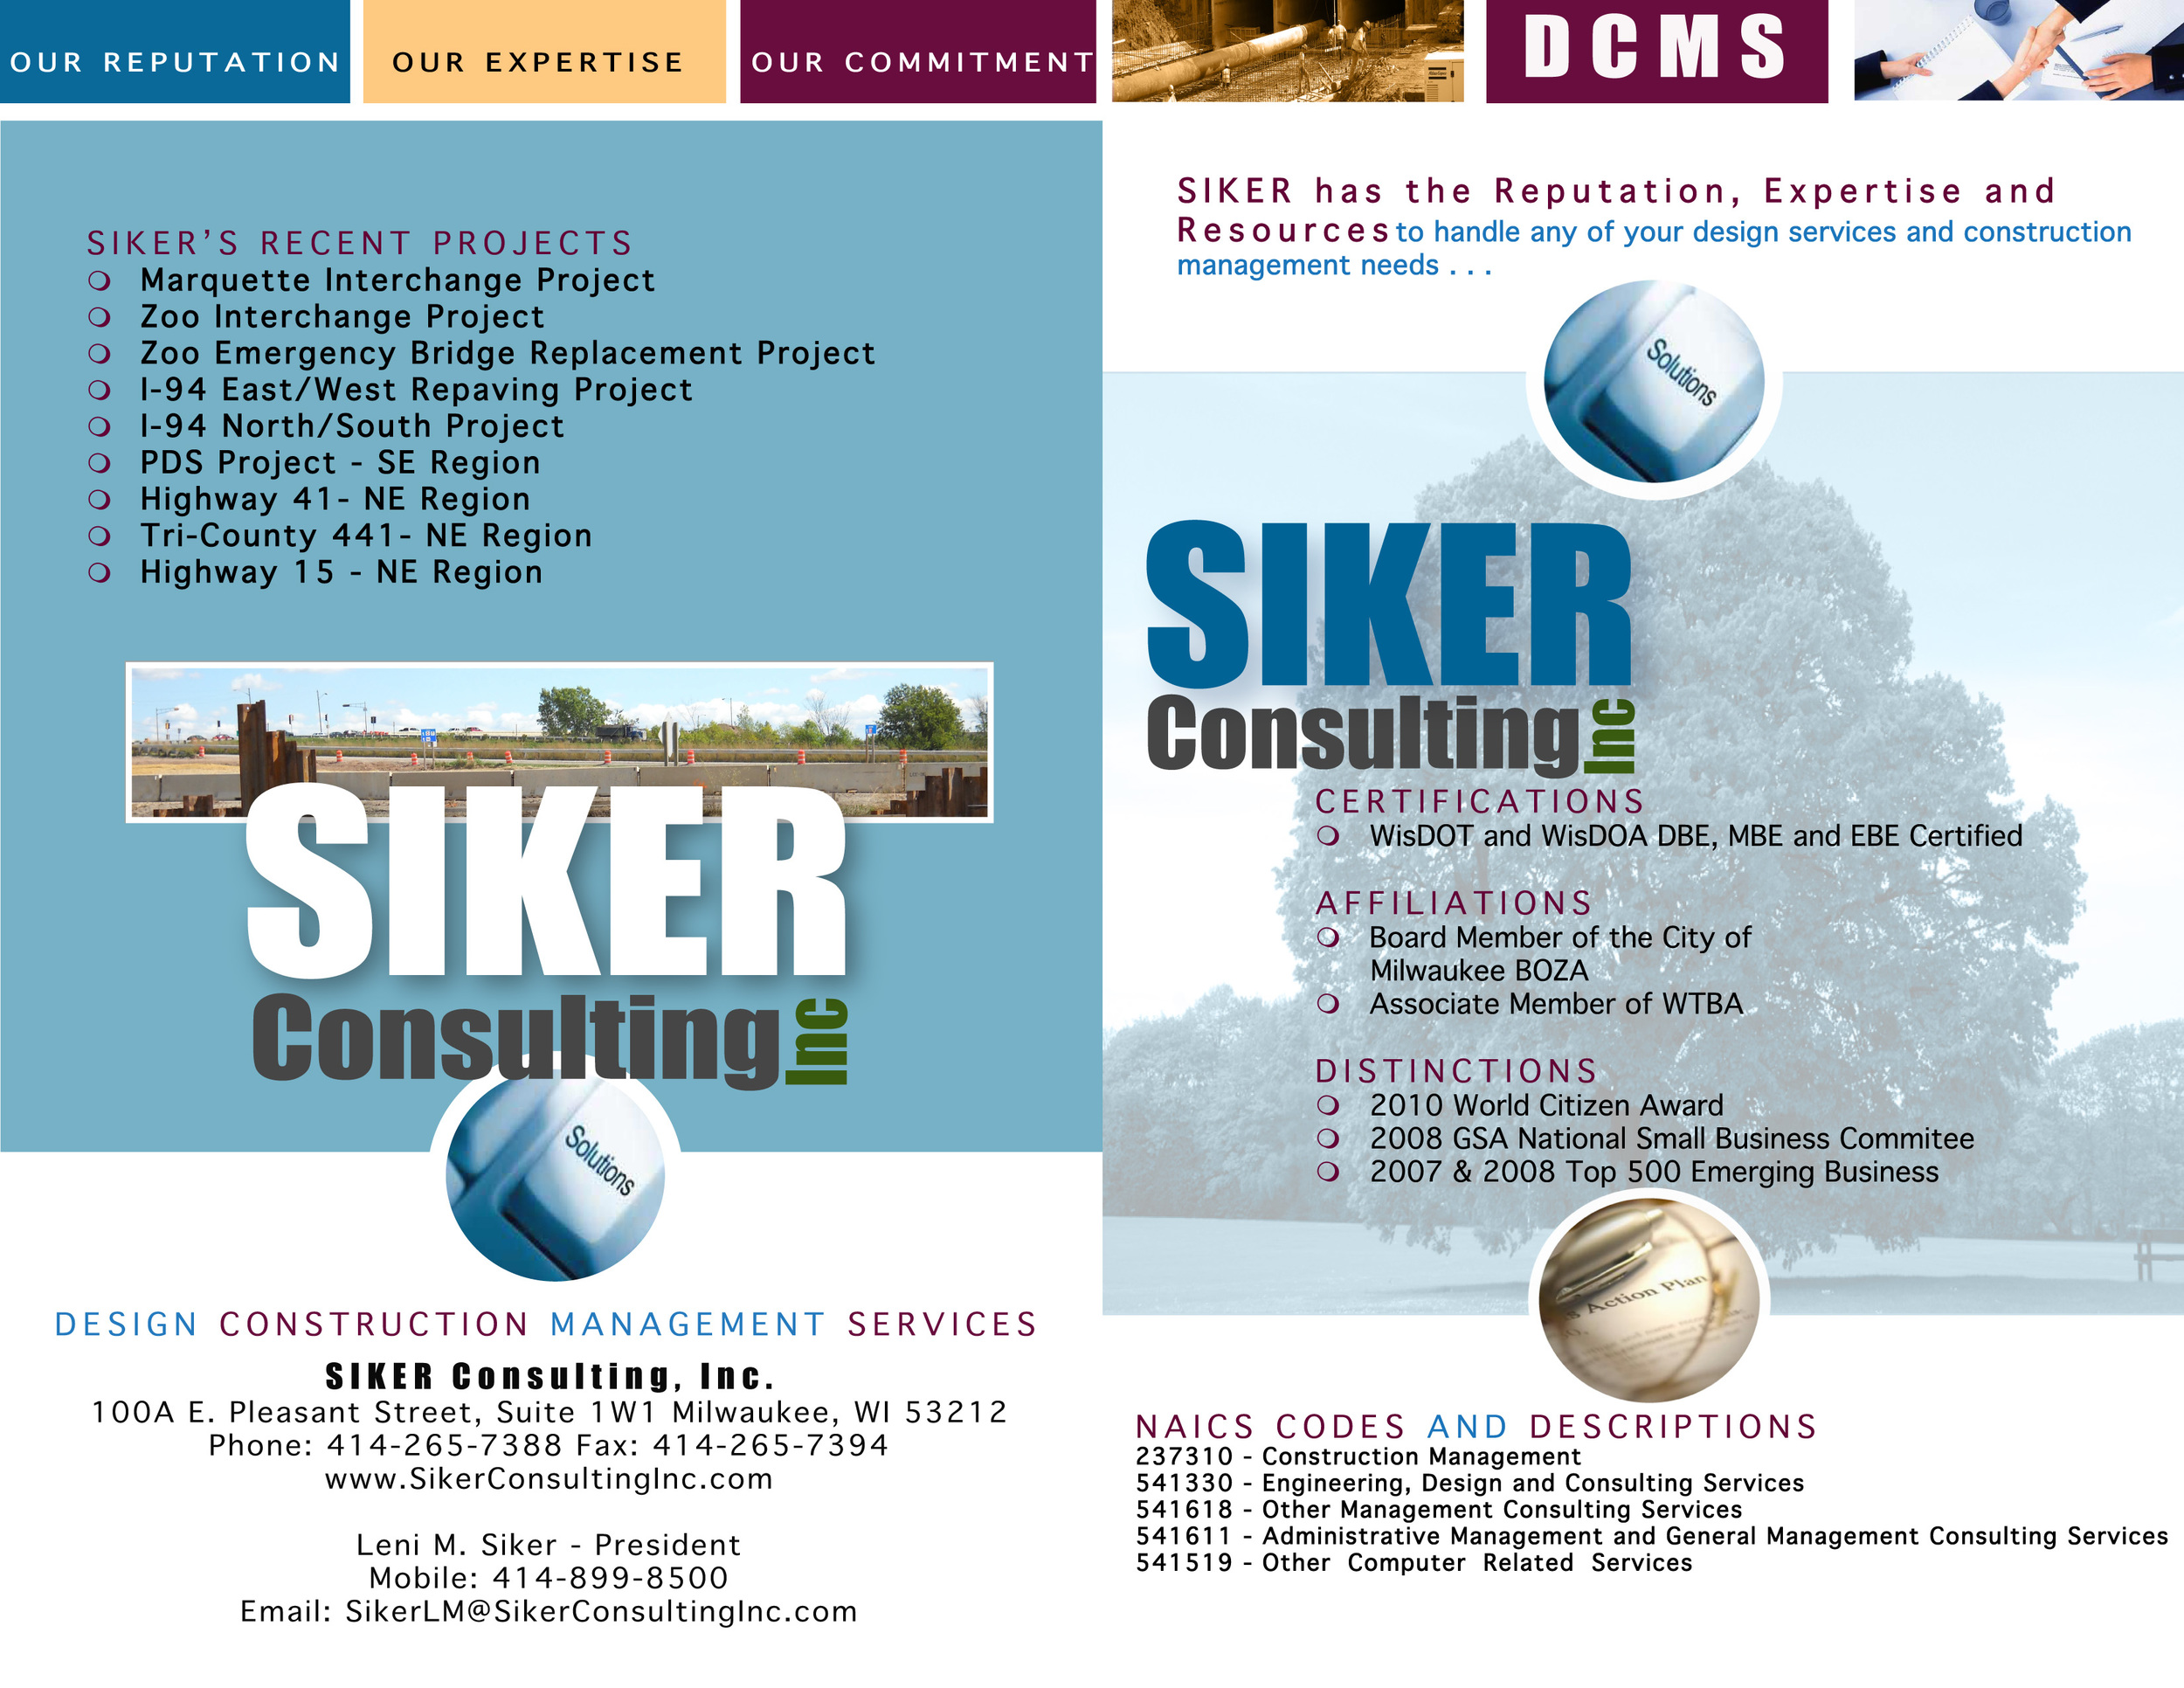 Siker Consulting Firm Brochure WisDOT Project 